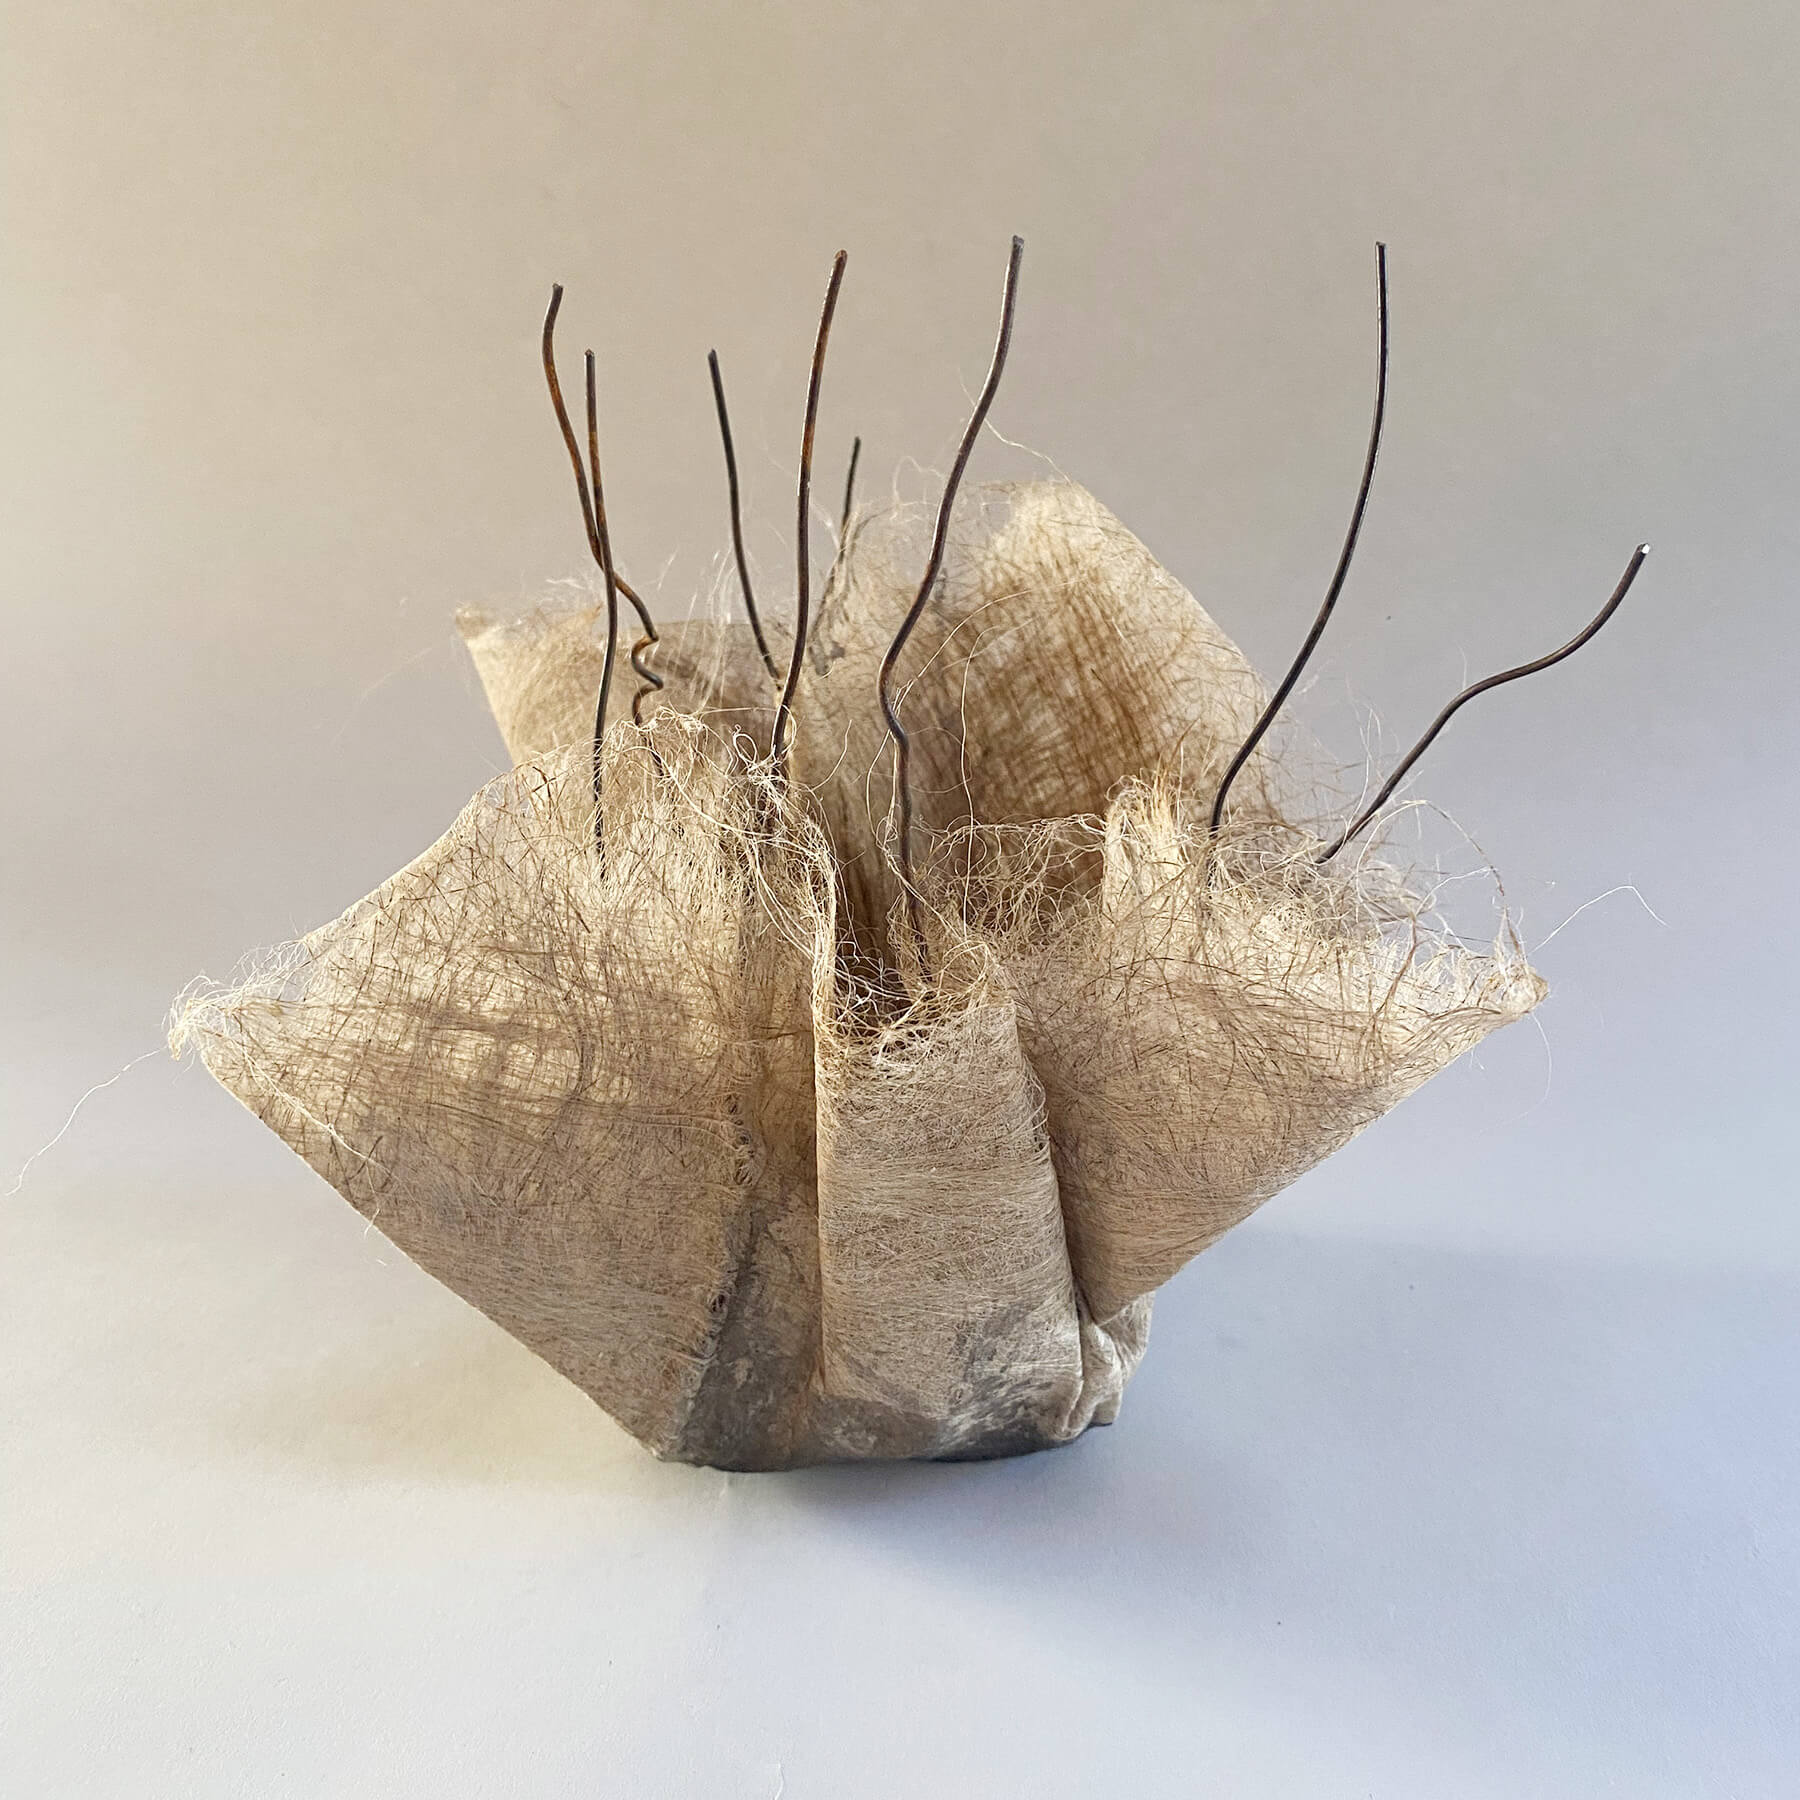 Wabi-sabi - Paper Sculpture and Collage example 1 - By Jacqueline Mallegni